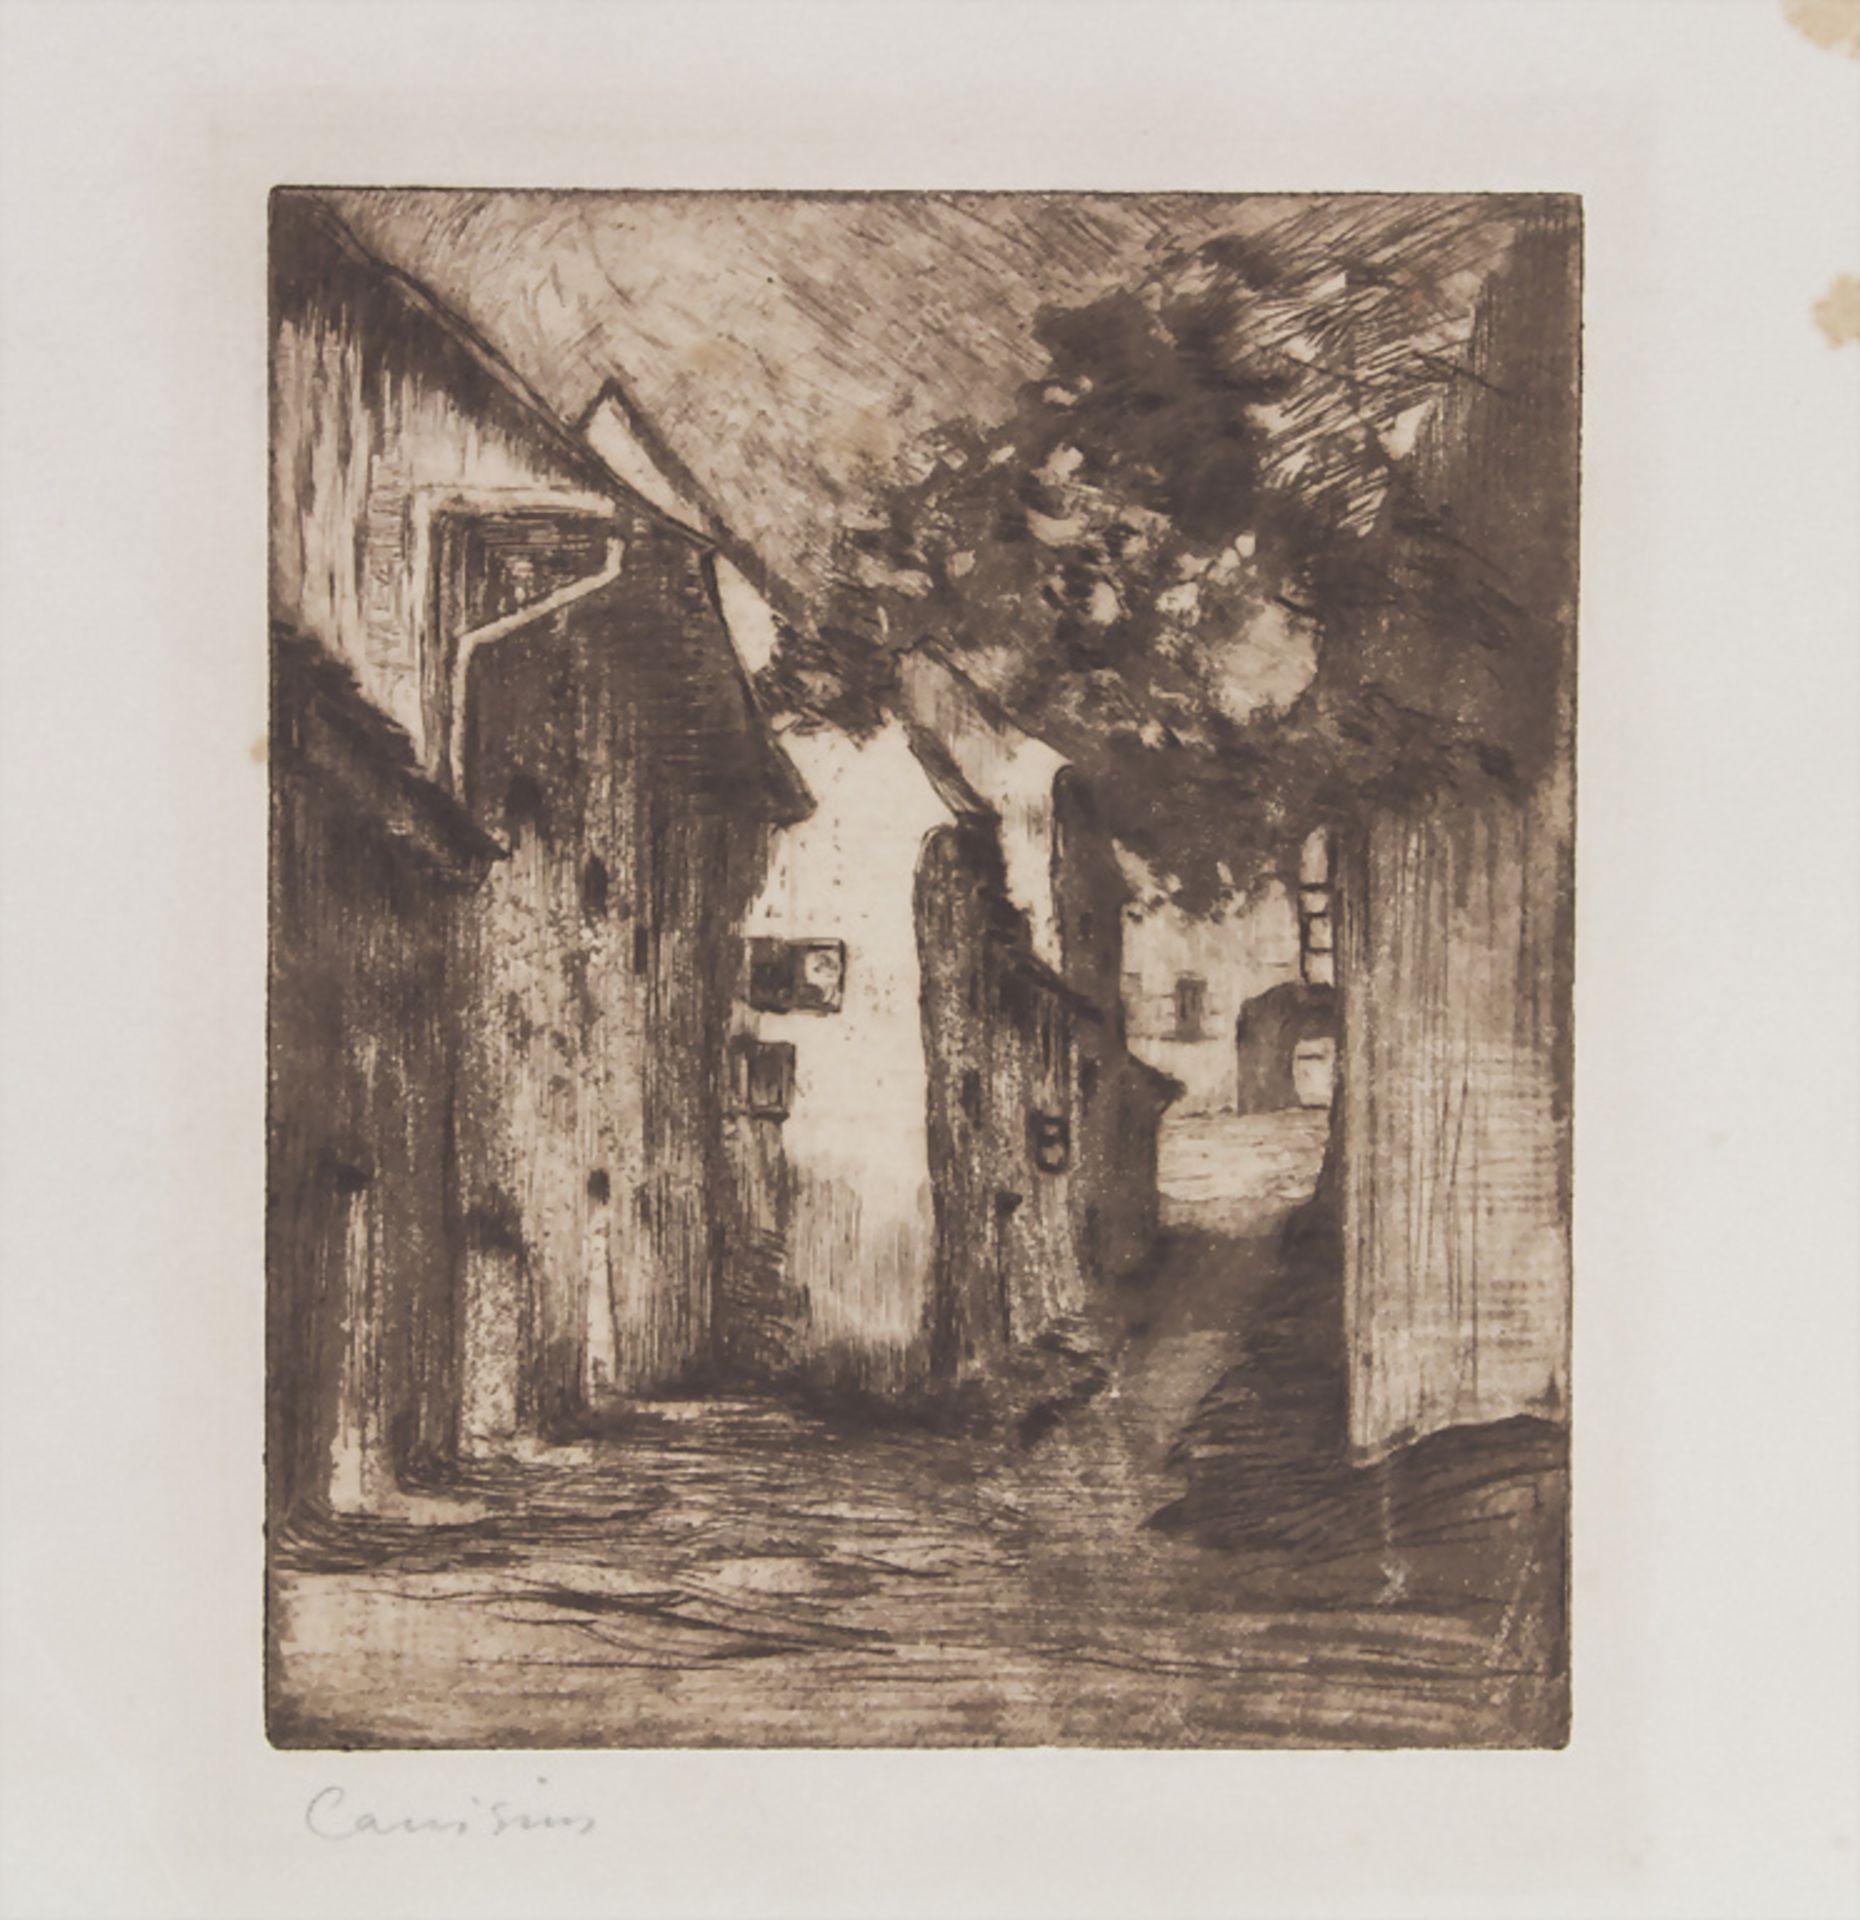 Richard Canisius (1872-1934), 'Gasse' / 'An alley' - Image 2 of 5